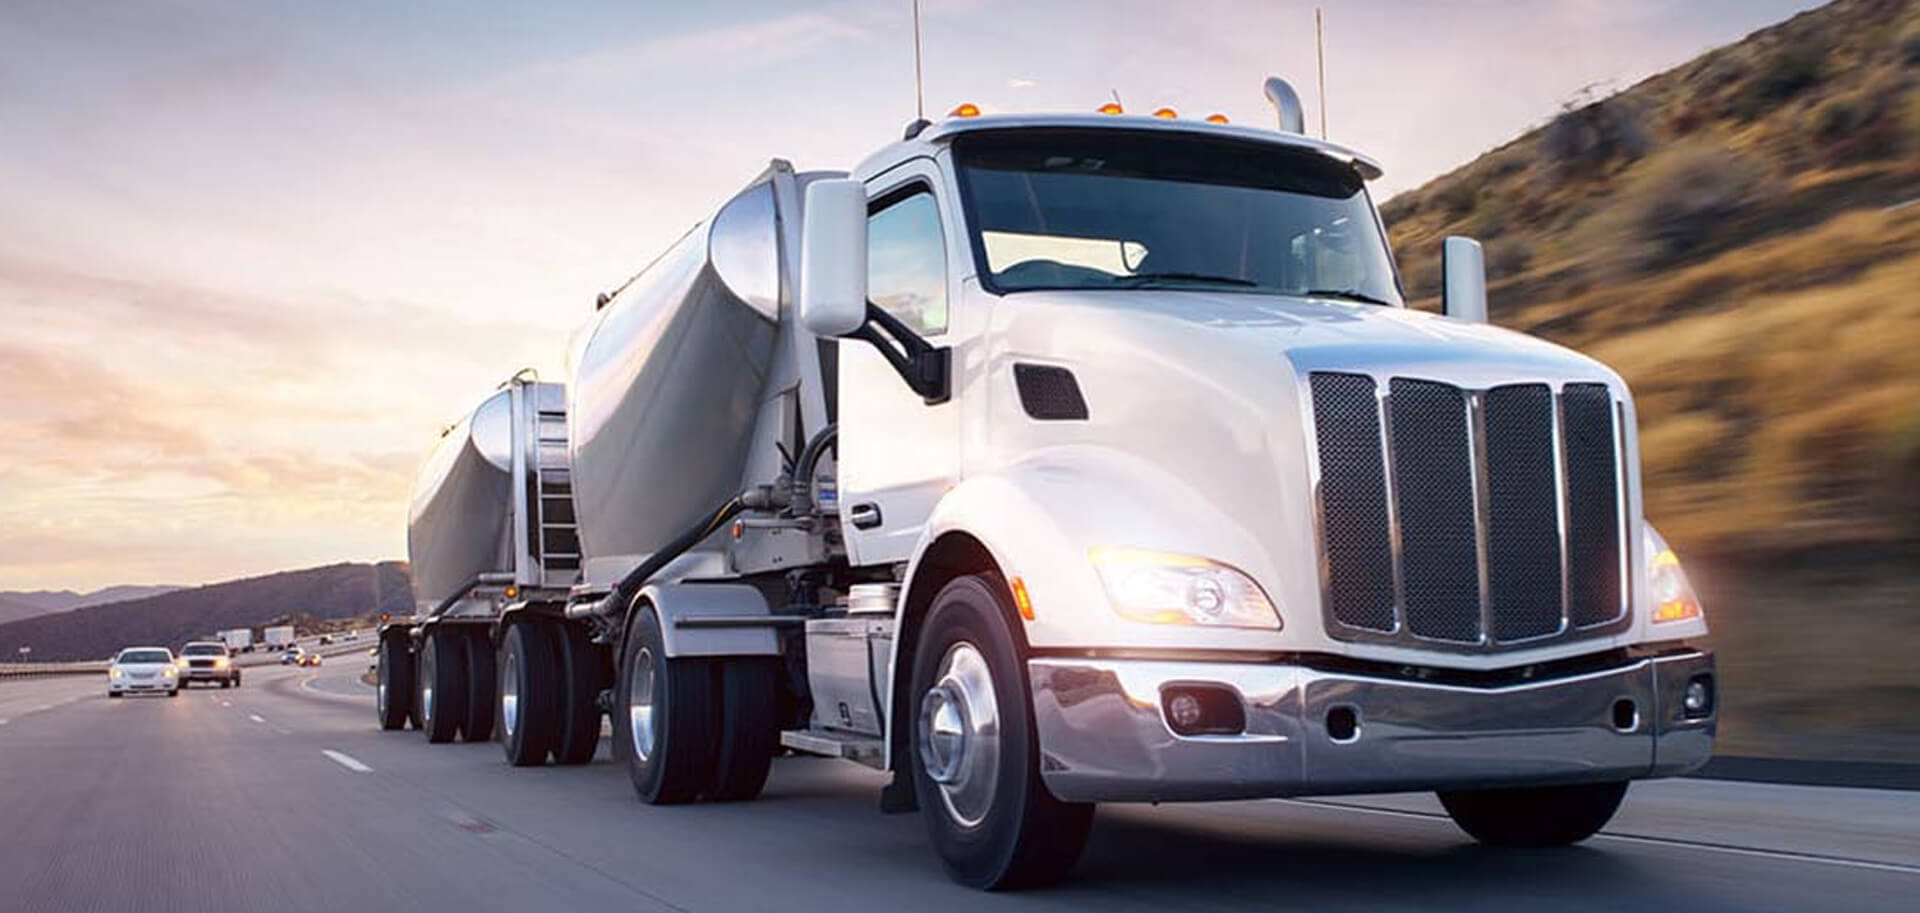 Trucking Services